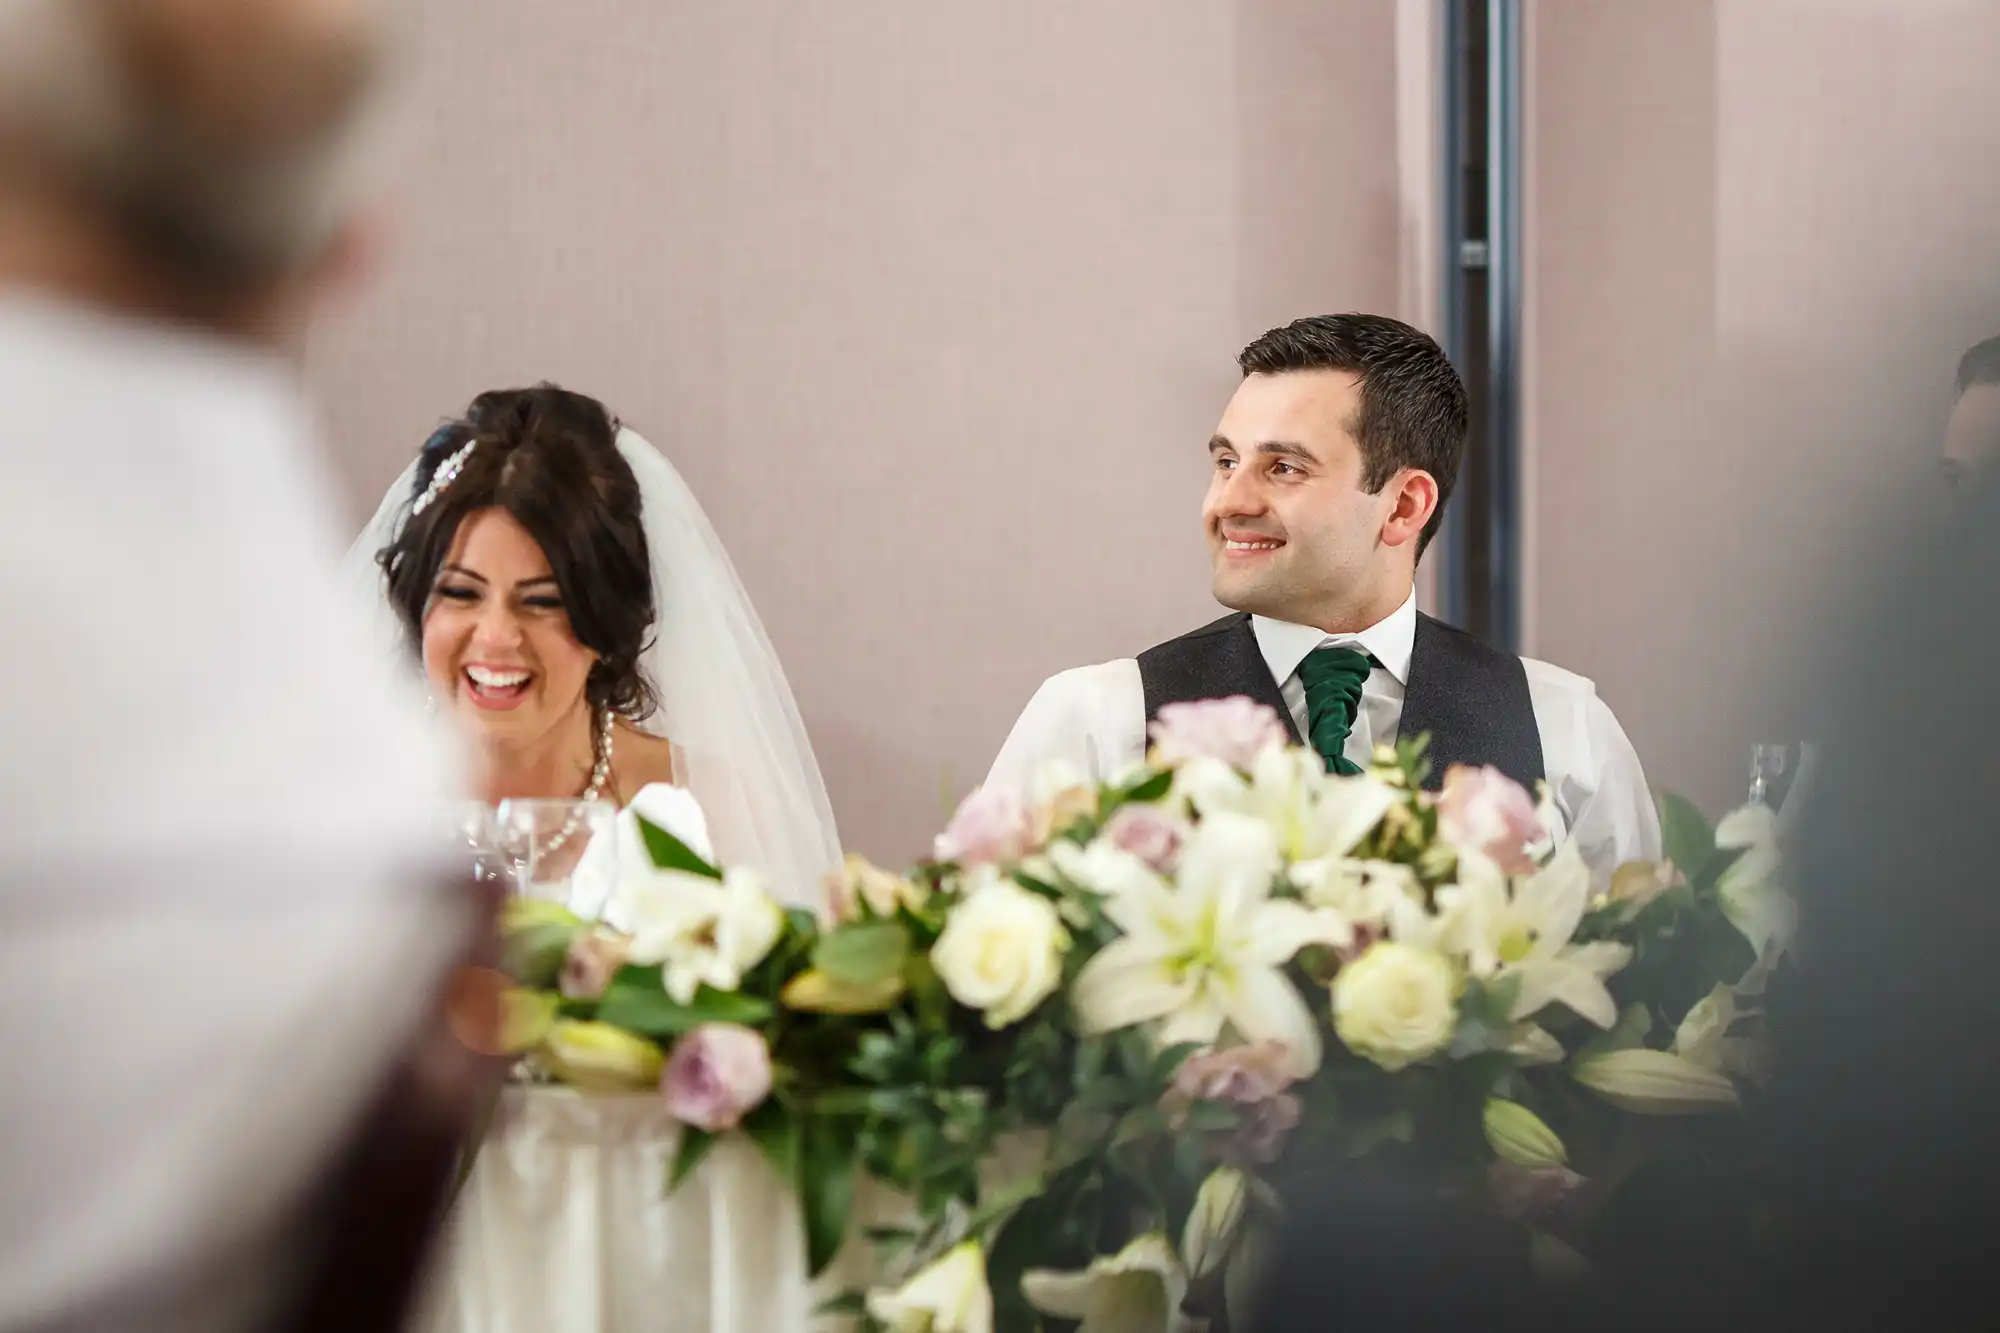 A bride and groom smiling at their wedding, with the groom looking at the bride as she laughs joyfully, surrounded by flowers.